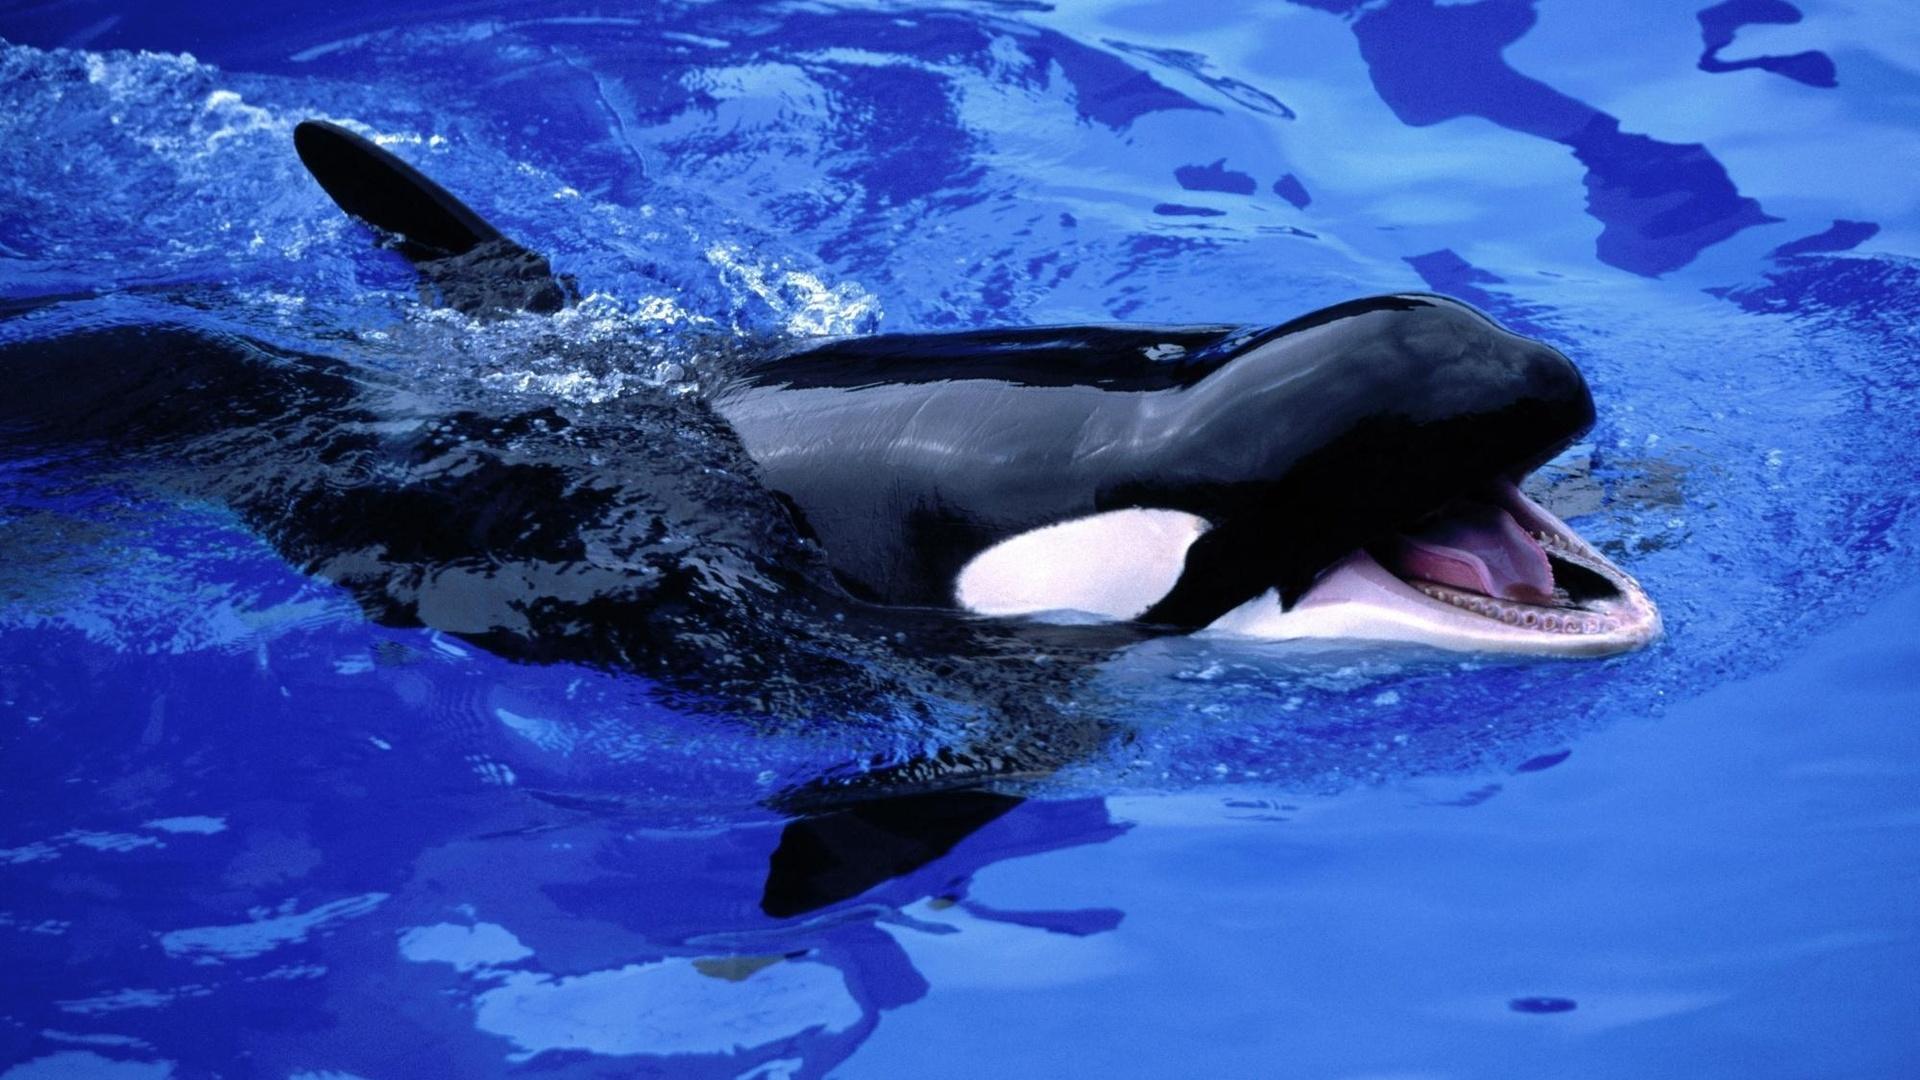 Killer whale's mouth